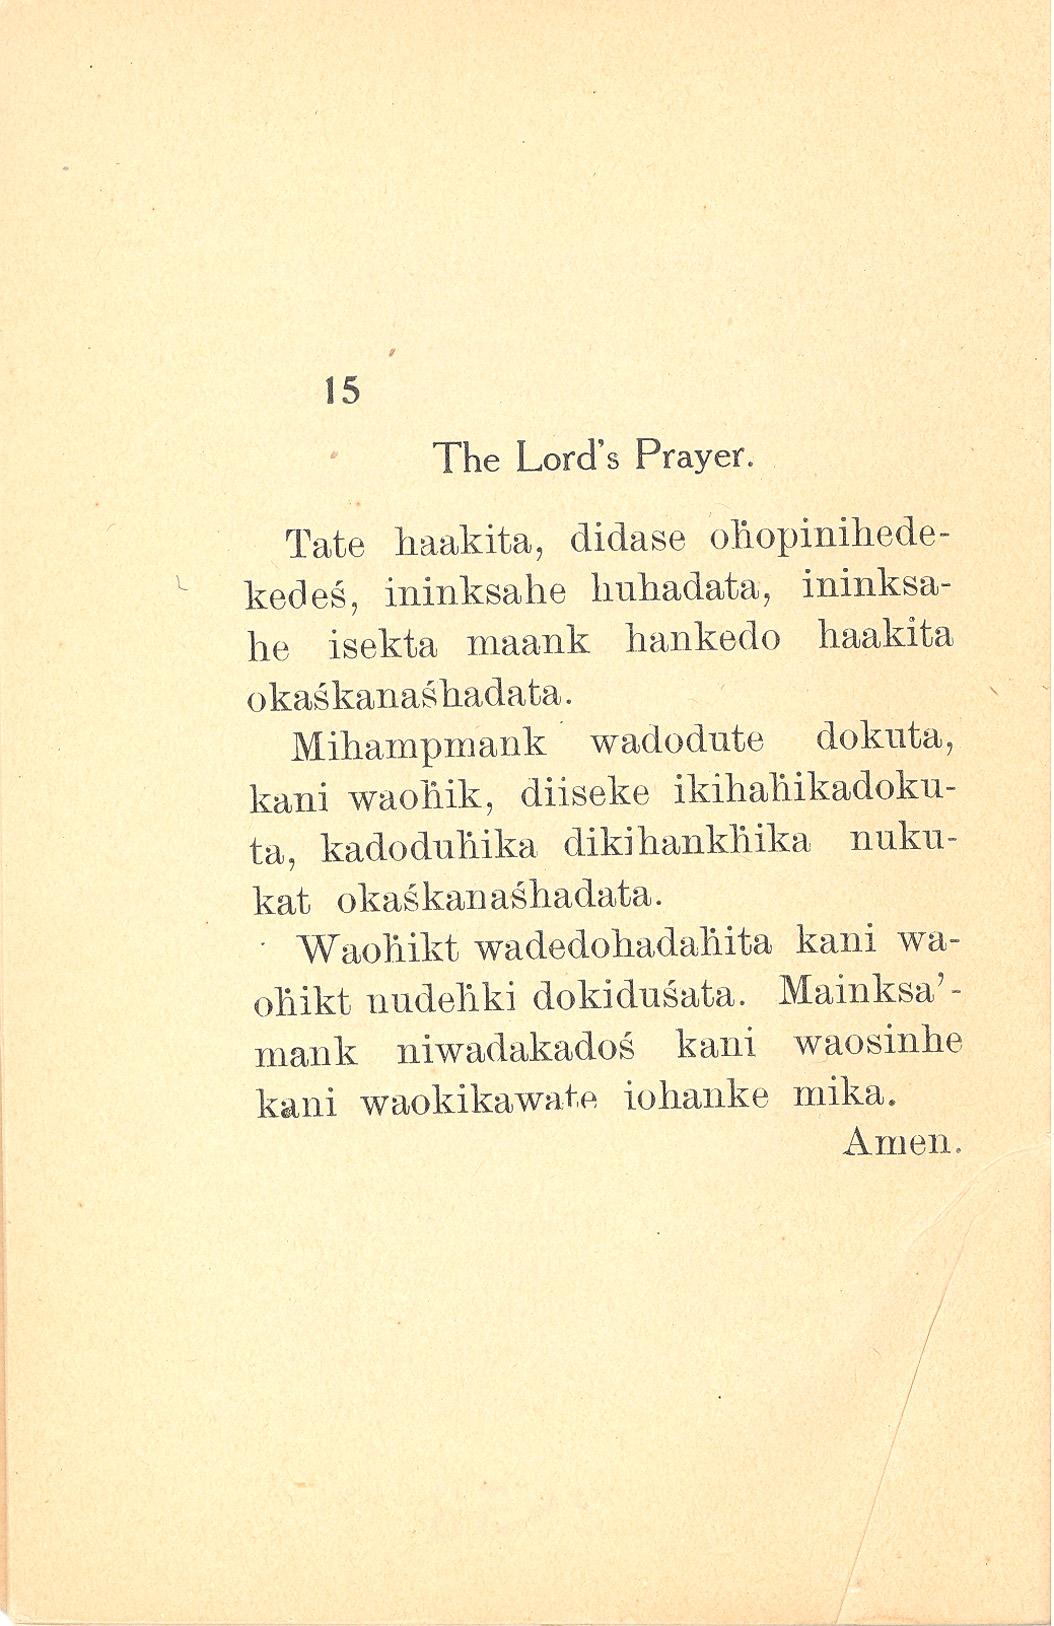 Mandan Hymns. Mandans learned traditional Christian hymns and prayers in translations by Reverend C. L. Hall. Hall studied the languages of the people of Fort Berthold and eventually came to understand the languages well enough to translate hymns into each of the three languages of Fort Berthold. 